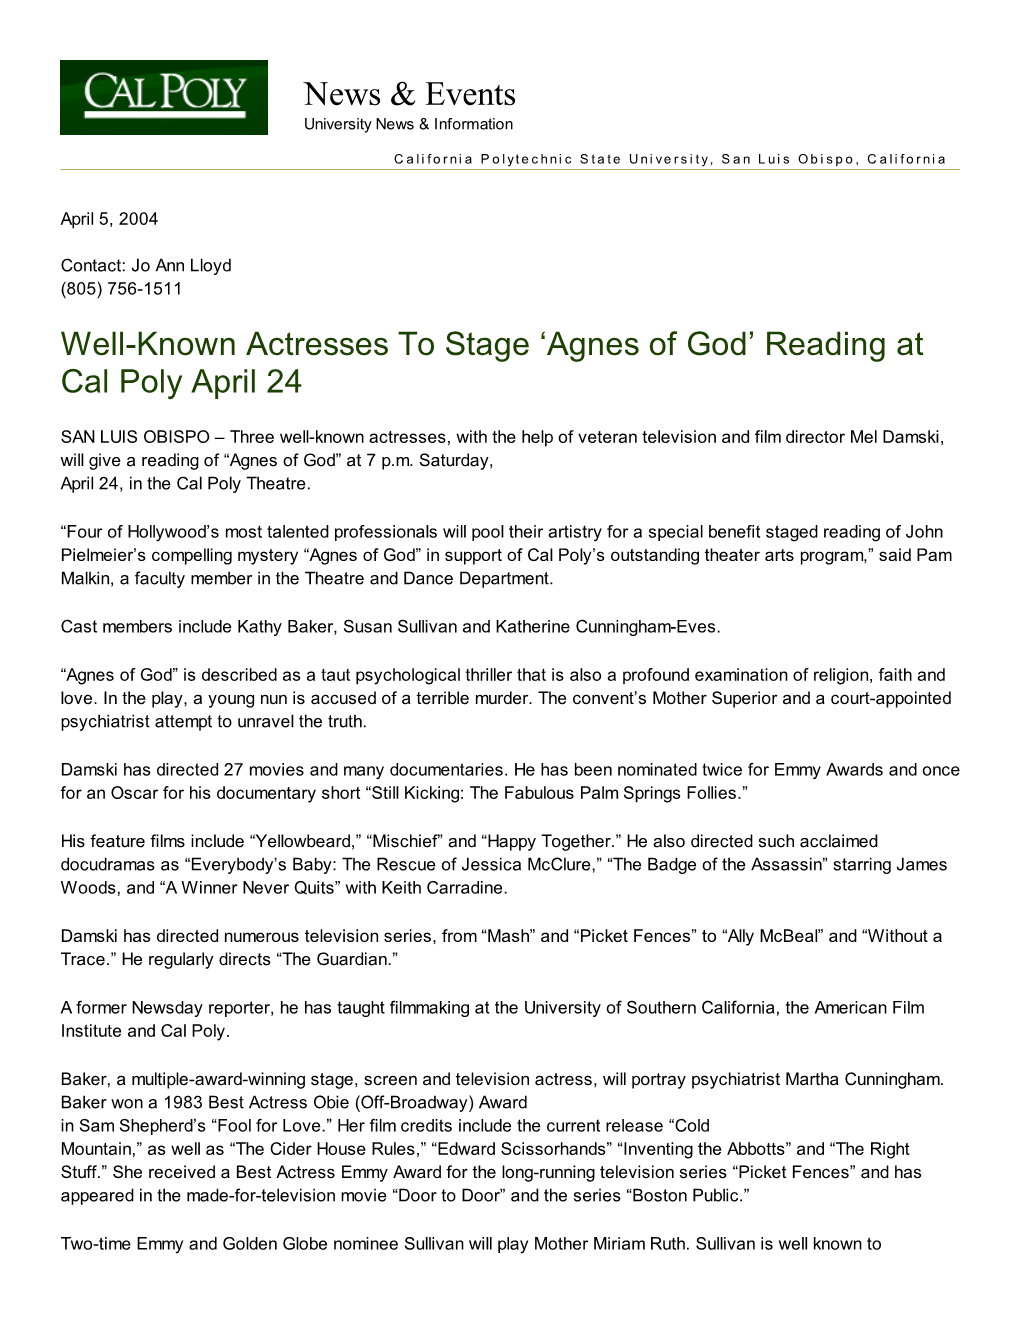 Well-Known Actresses to Stage Â•Ÿagnes of Godâ•Ž Reading at Cal